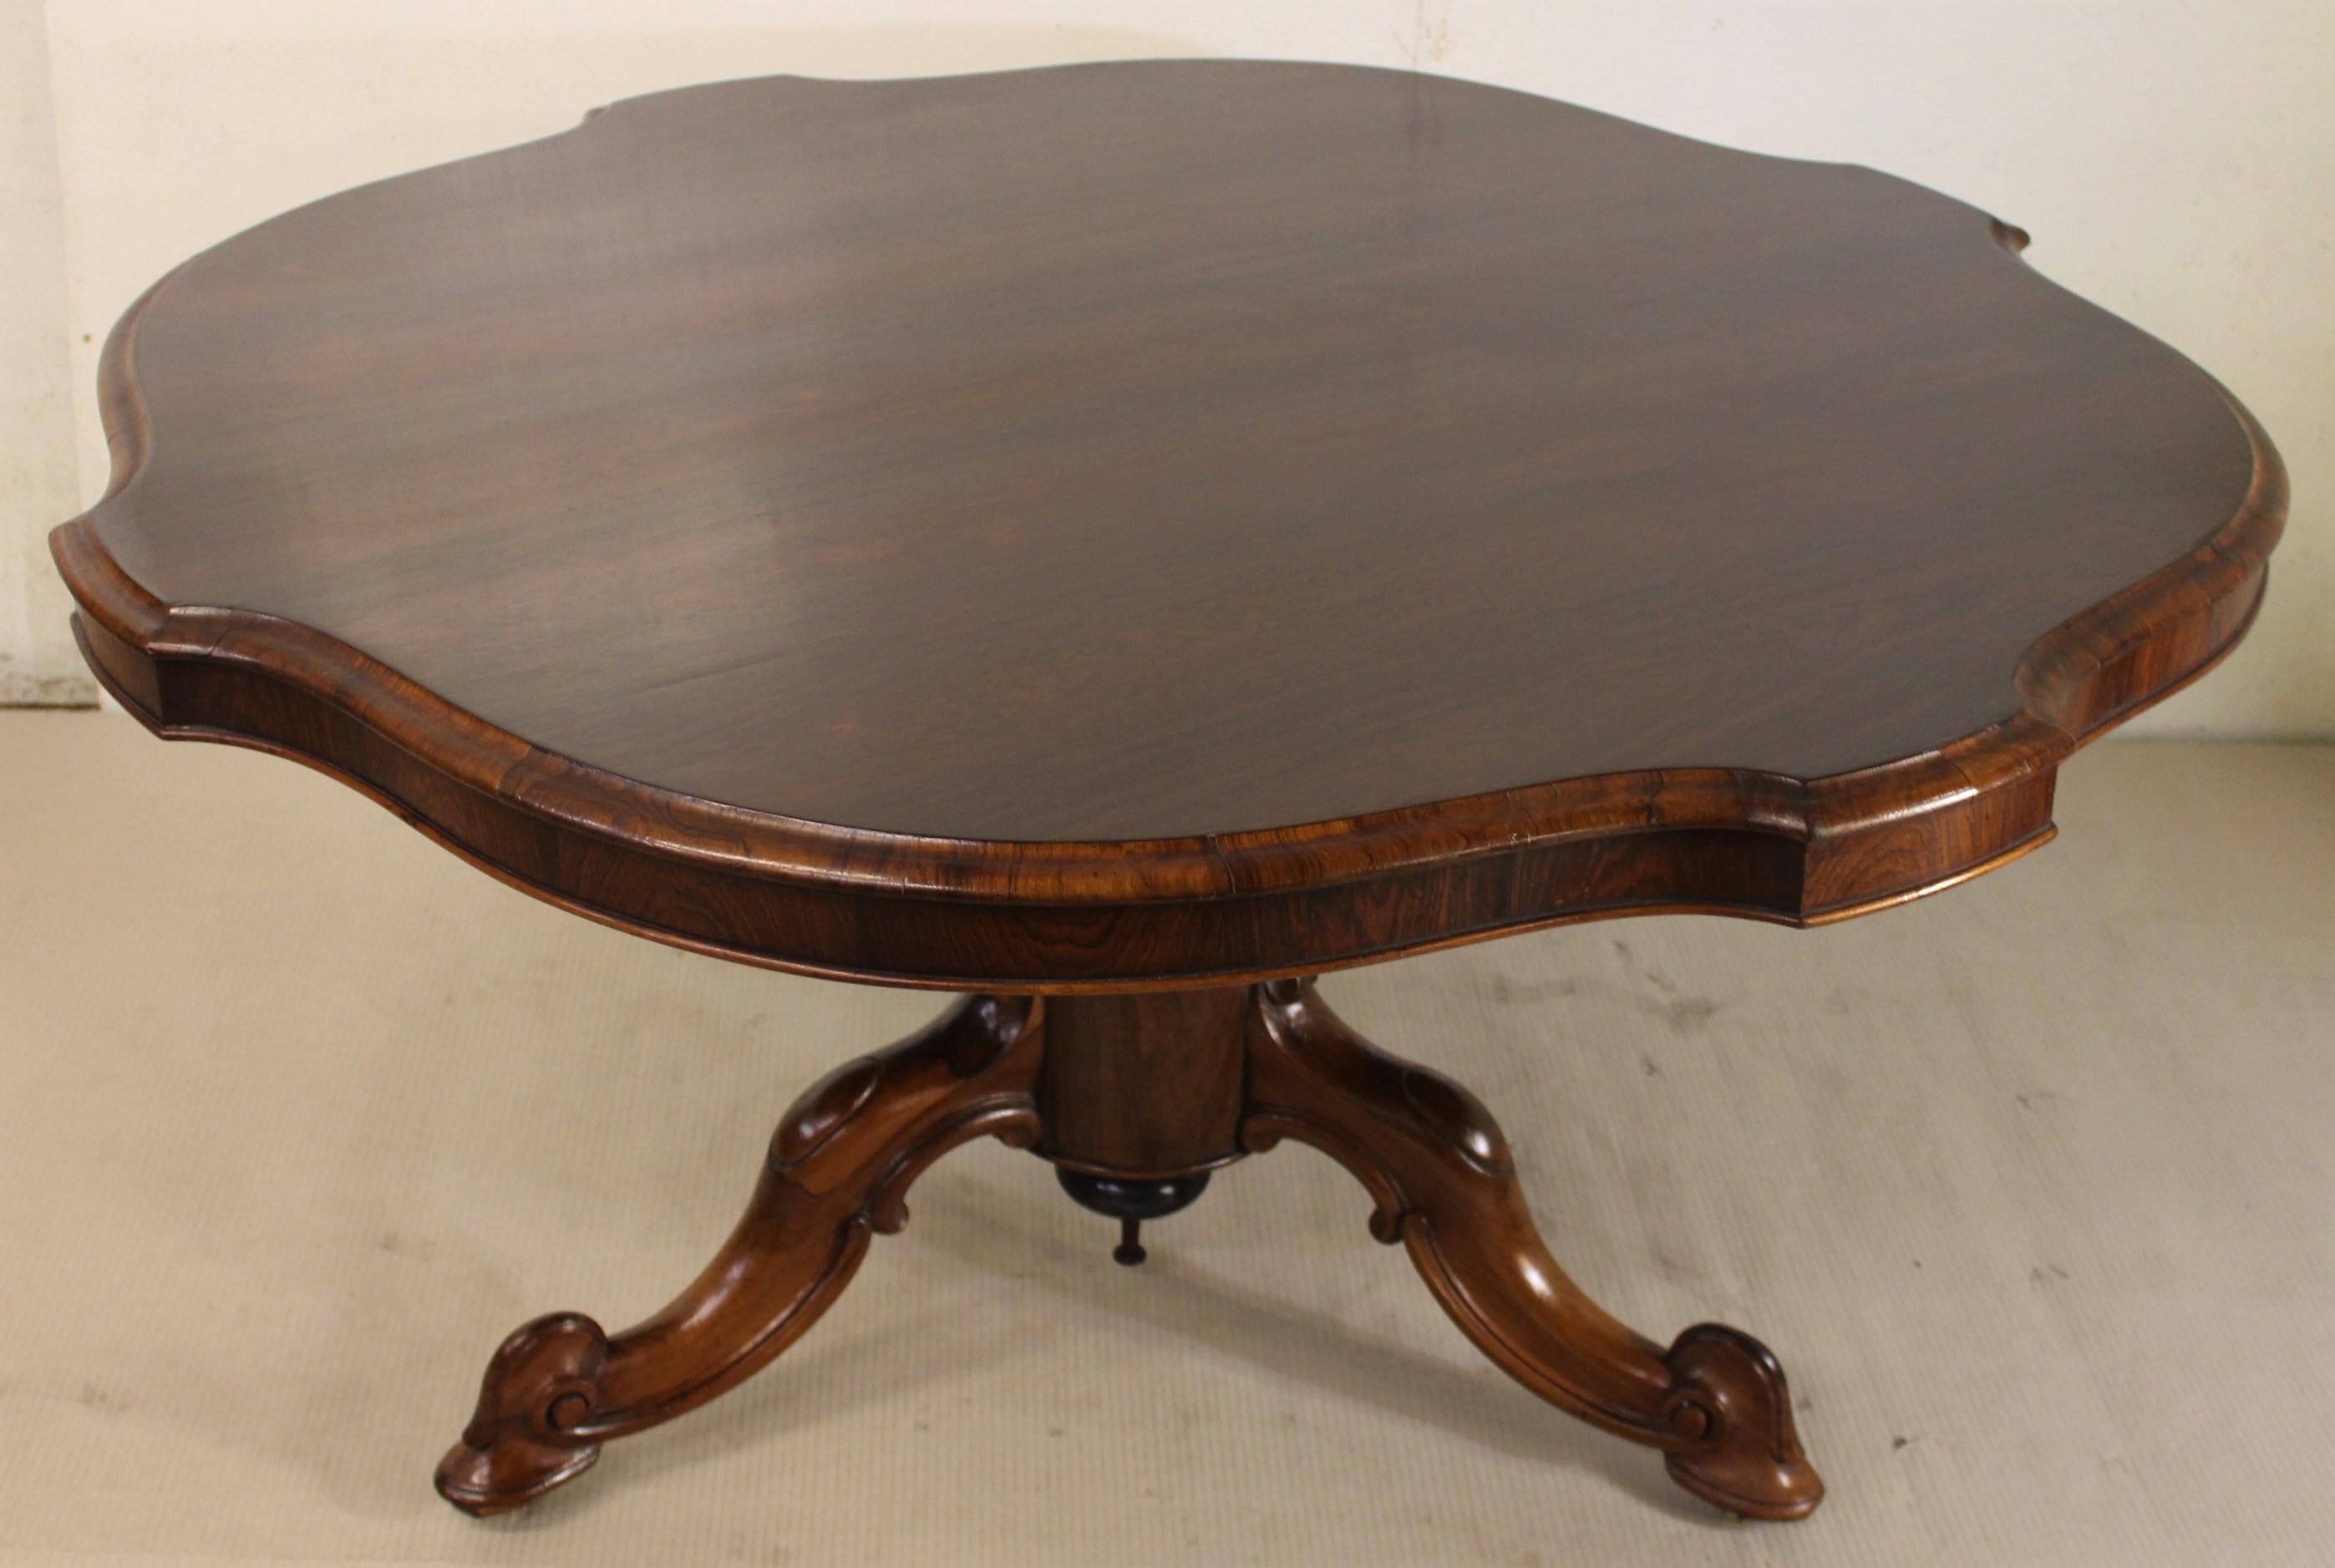 A fine quality Victorian period rosewood loo, or supper, table. Very well constructed in solid rosewood and attractive rosewood veneers onto a mahogany frame. The shaped top can be tilted up when not in use. The top is supported by a single central